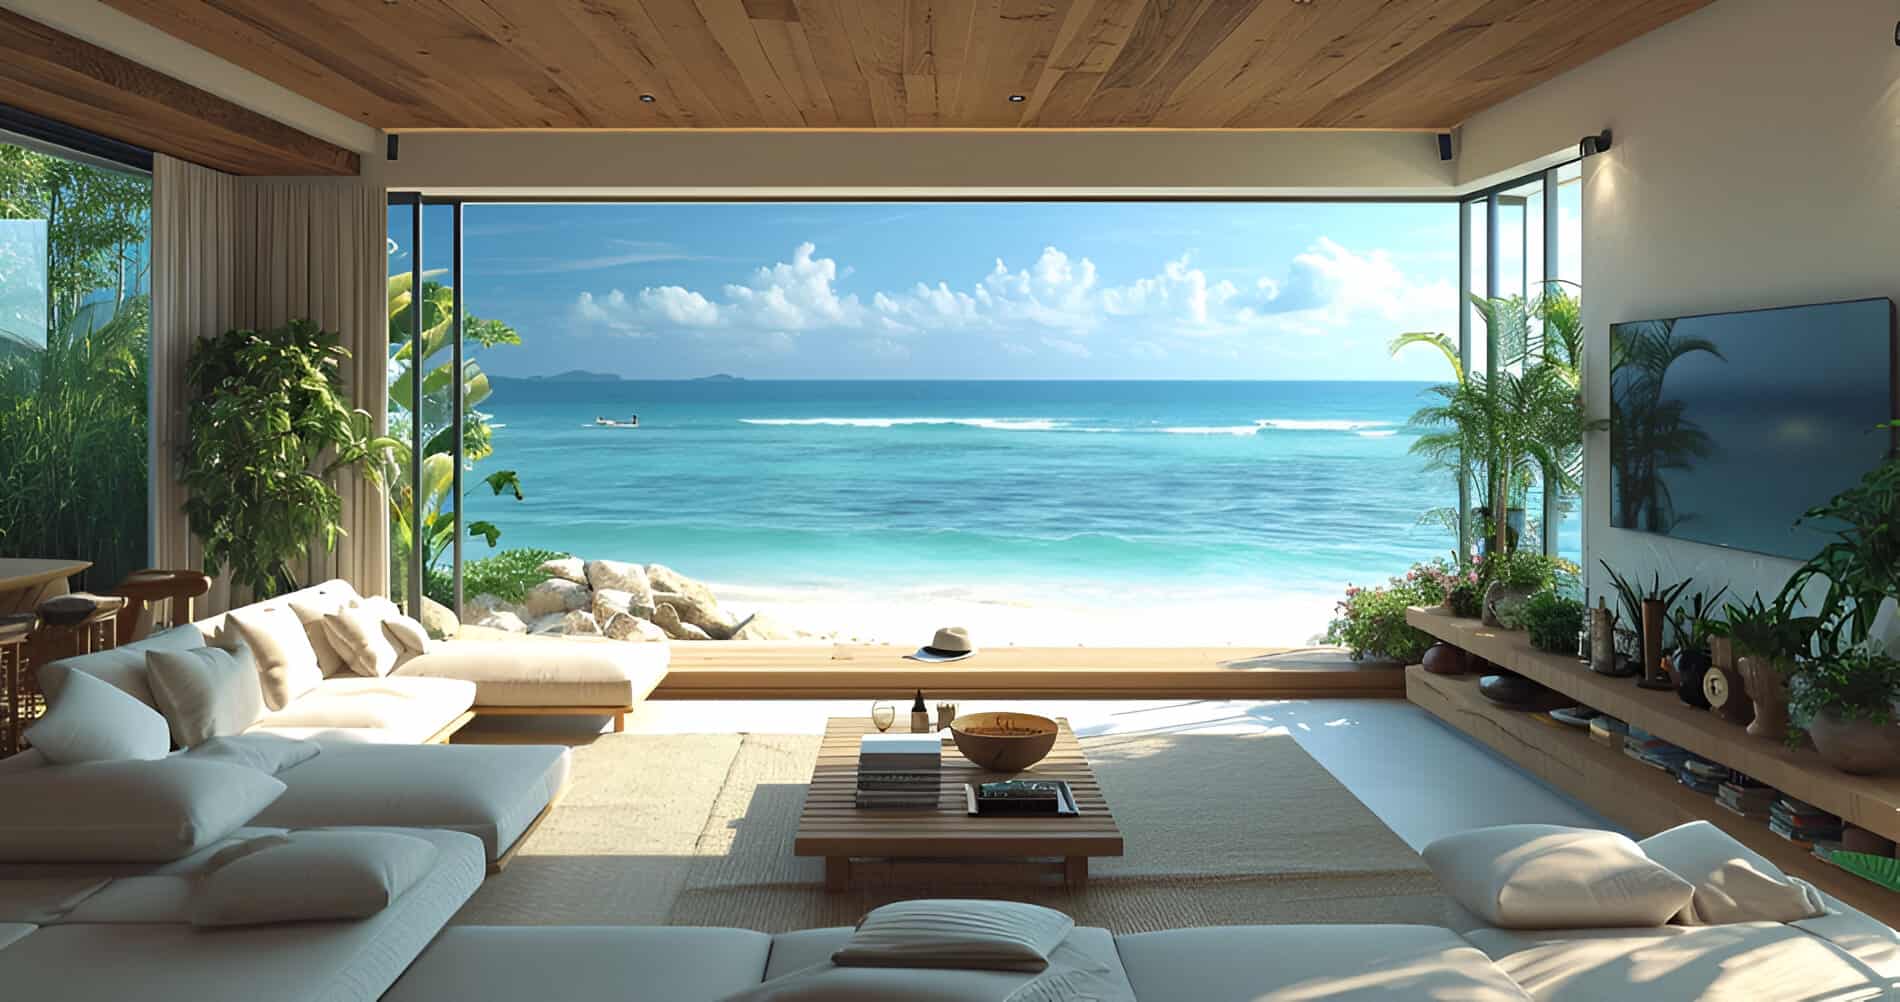 17 Beach House Living Room Designs That Will Make Your Home Feel Like a Permanent Vacation